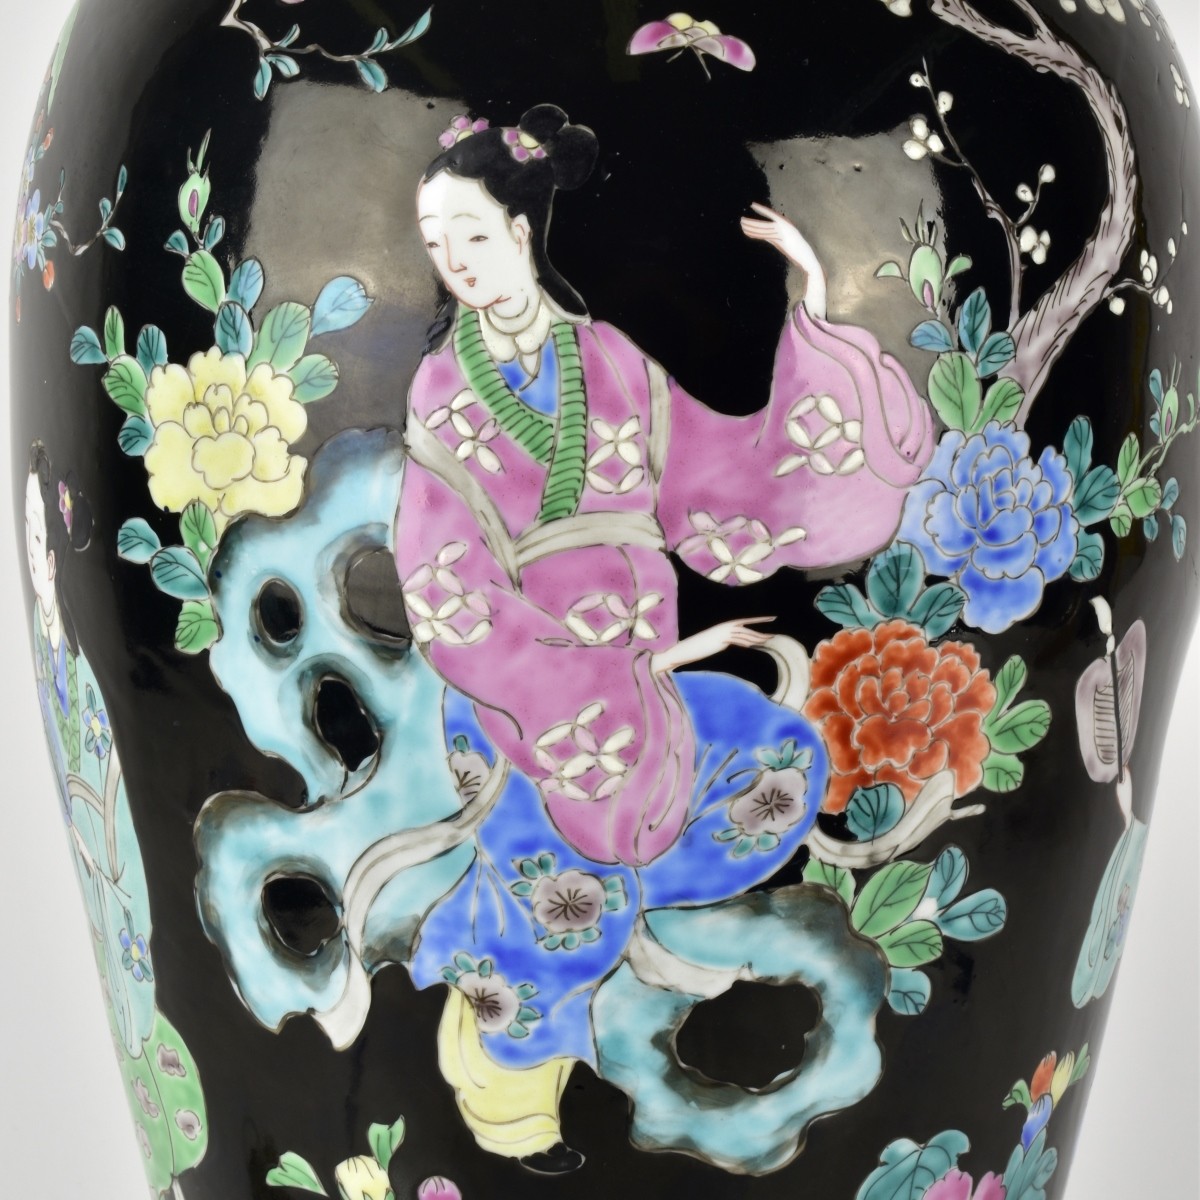 Large Chinese Vase Presented as a Lamp